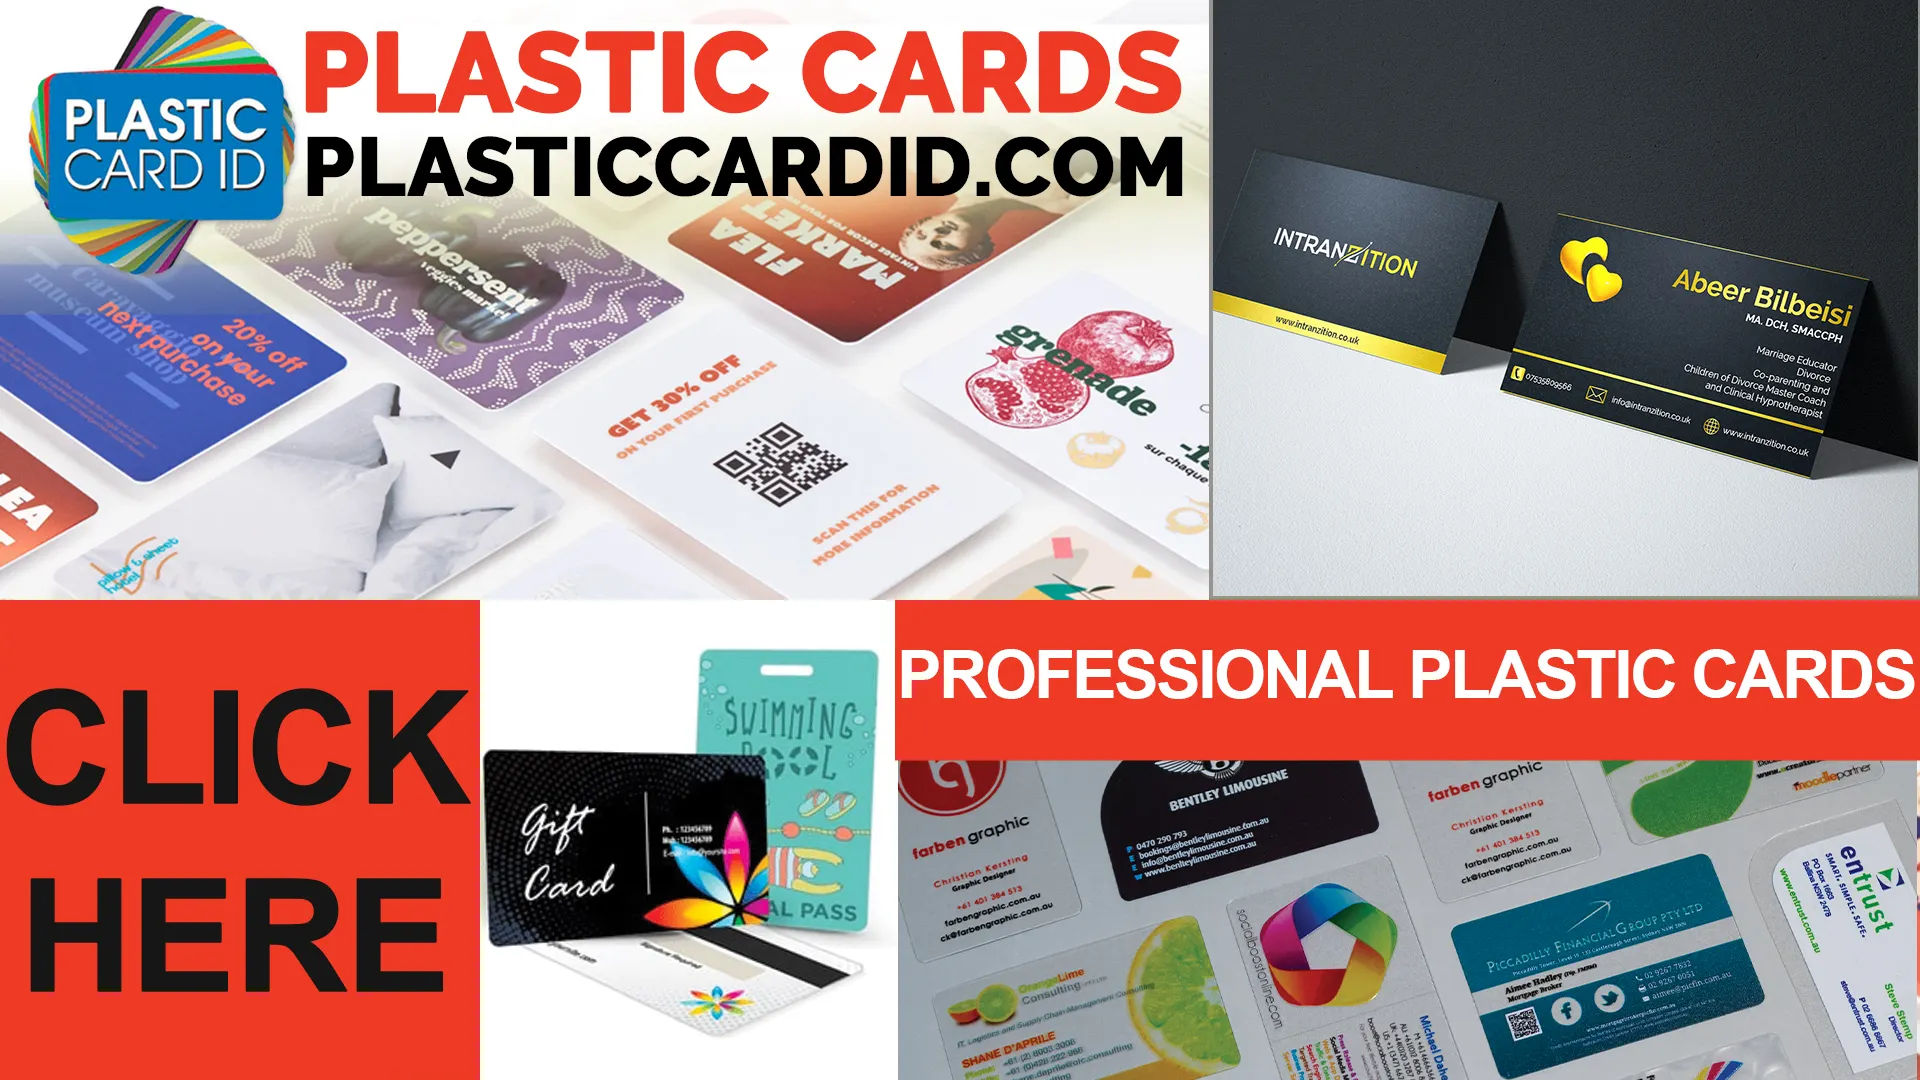 The Art of Crafting Your Brand Image Through Plastic Card Design